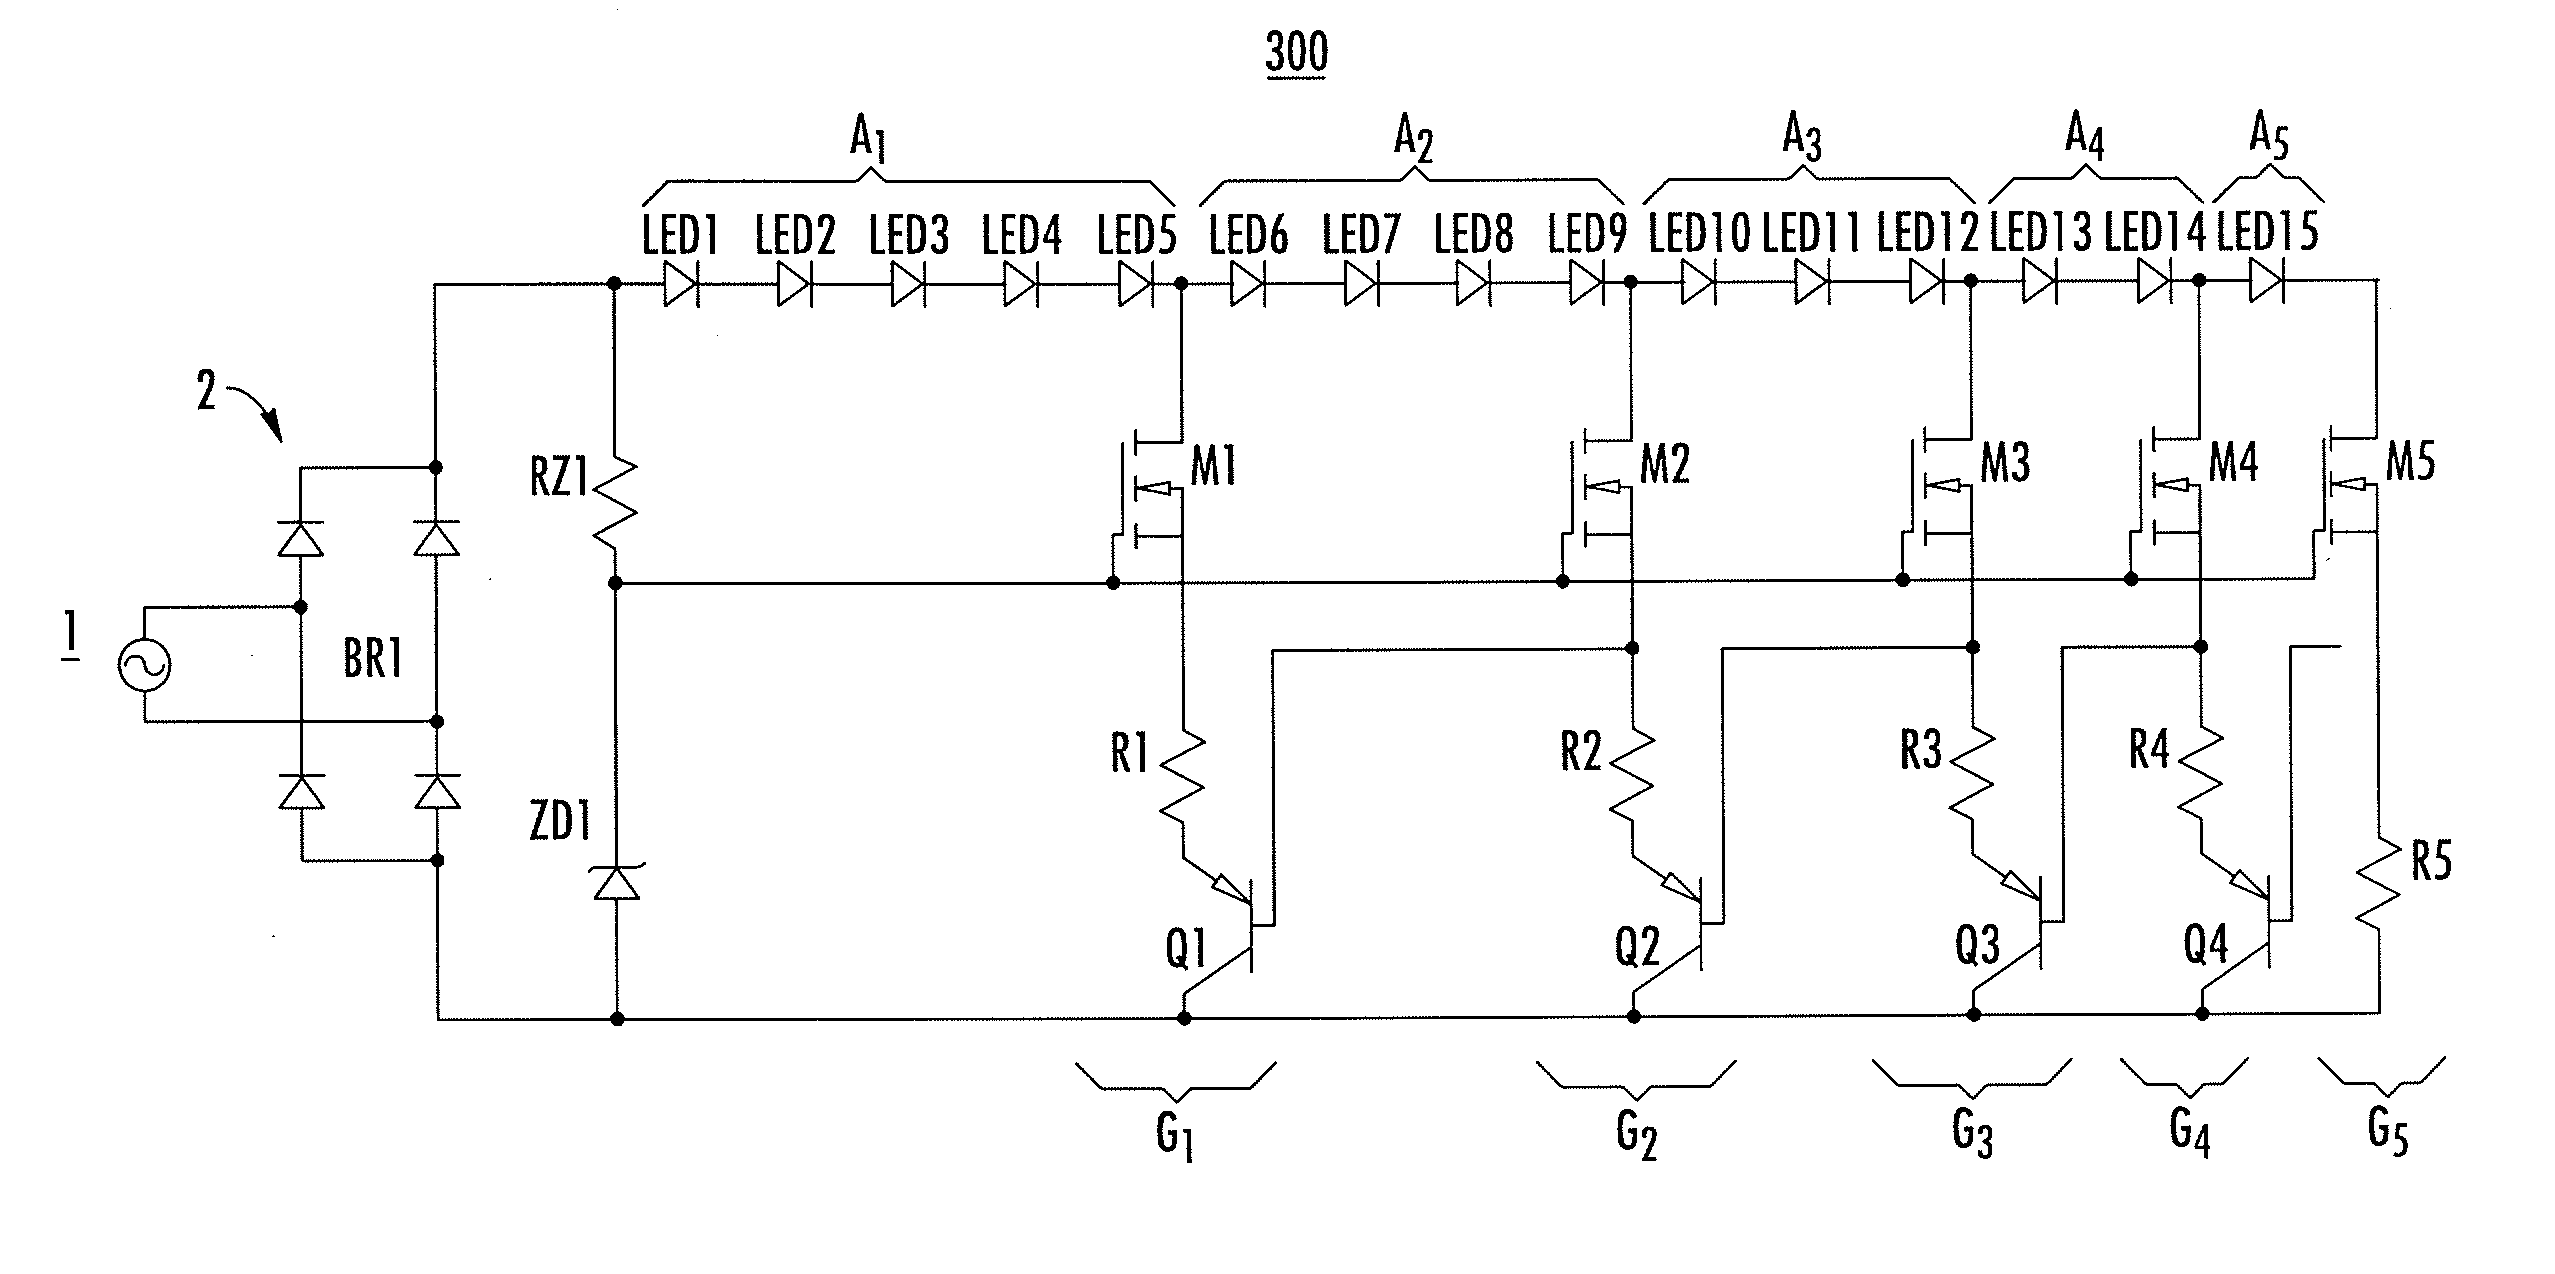 Light engine with LED switching array